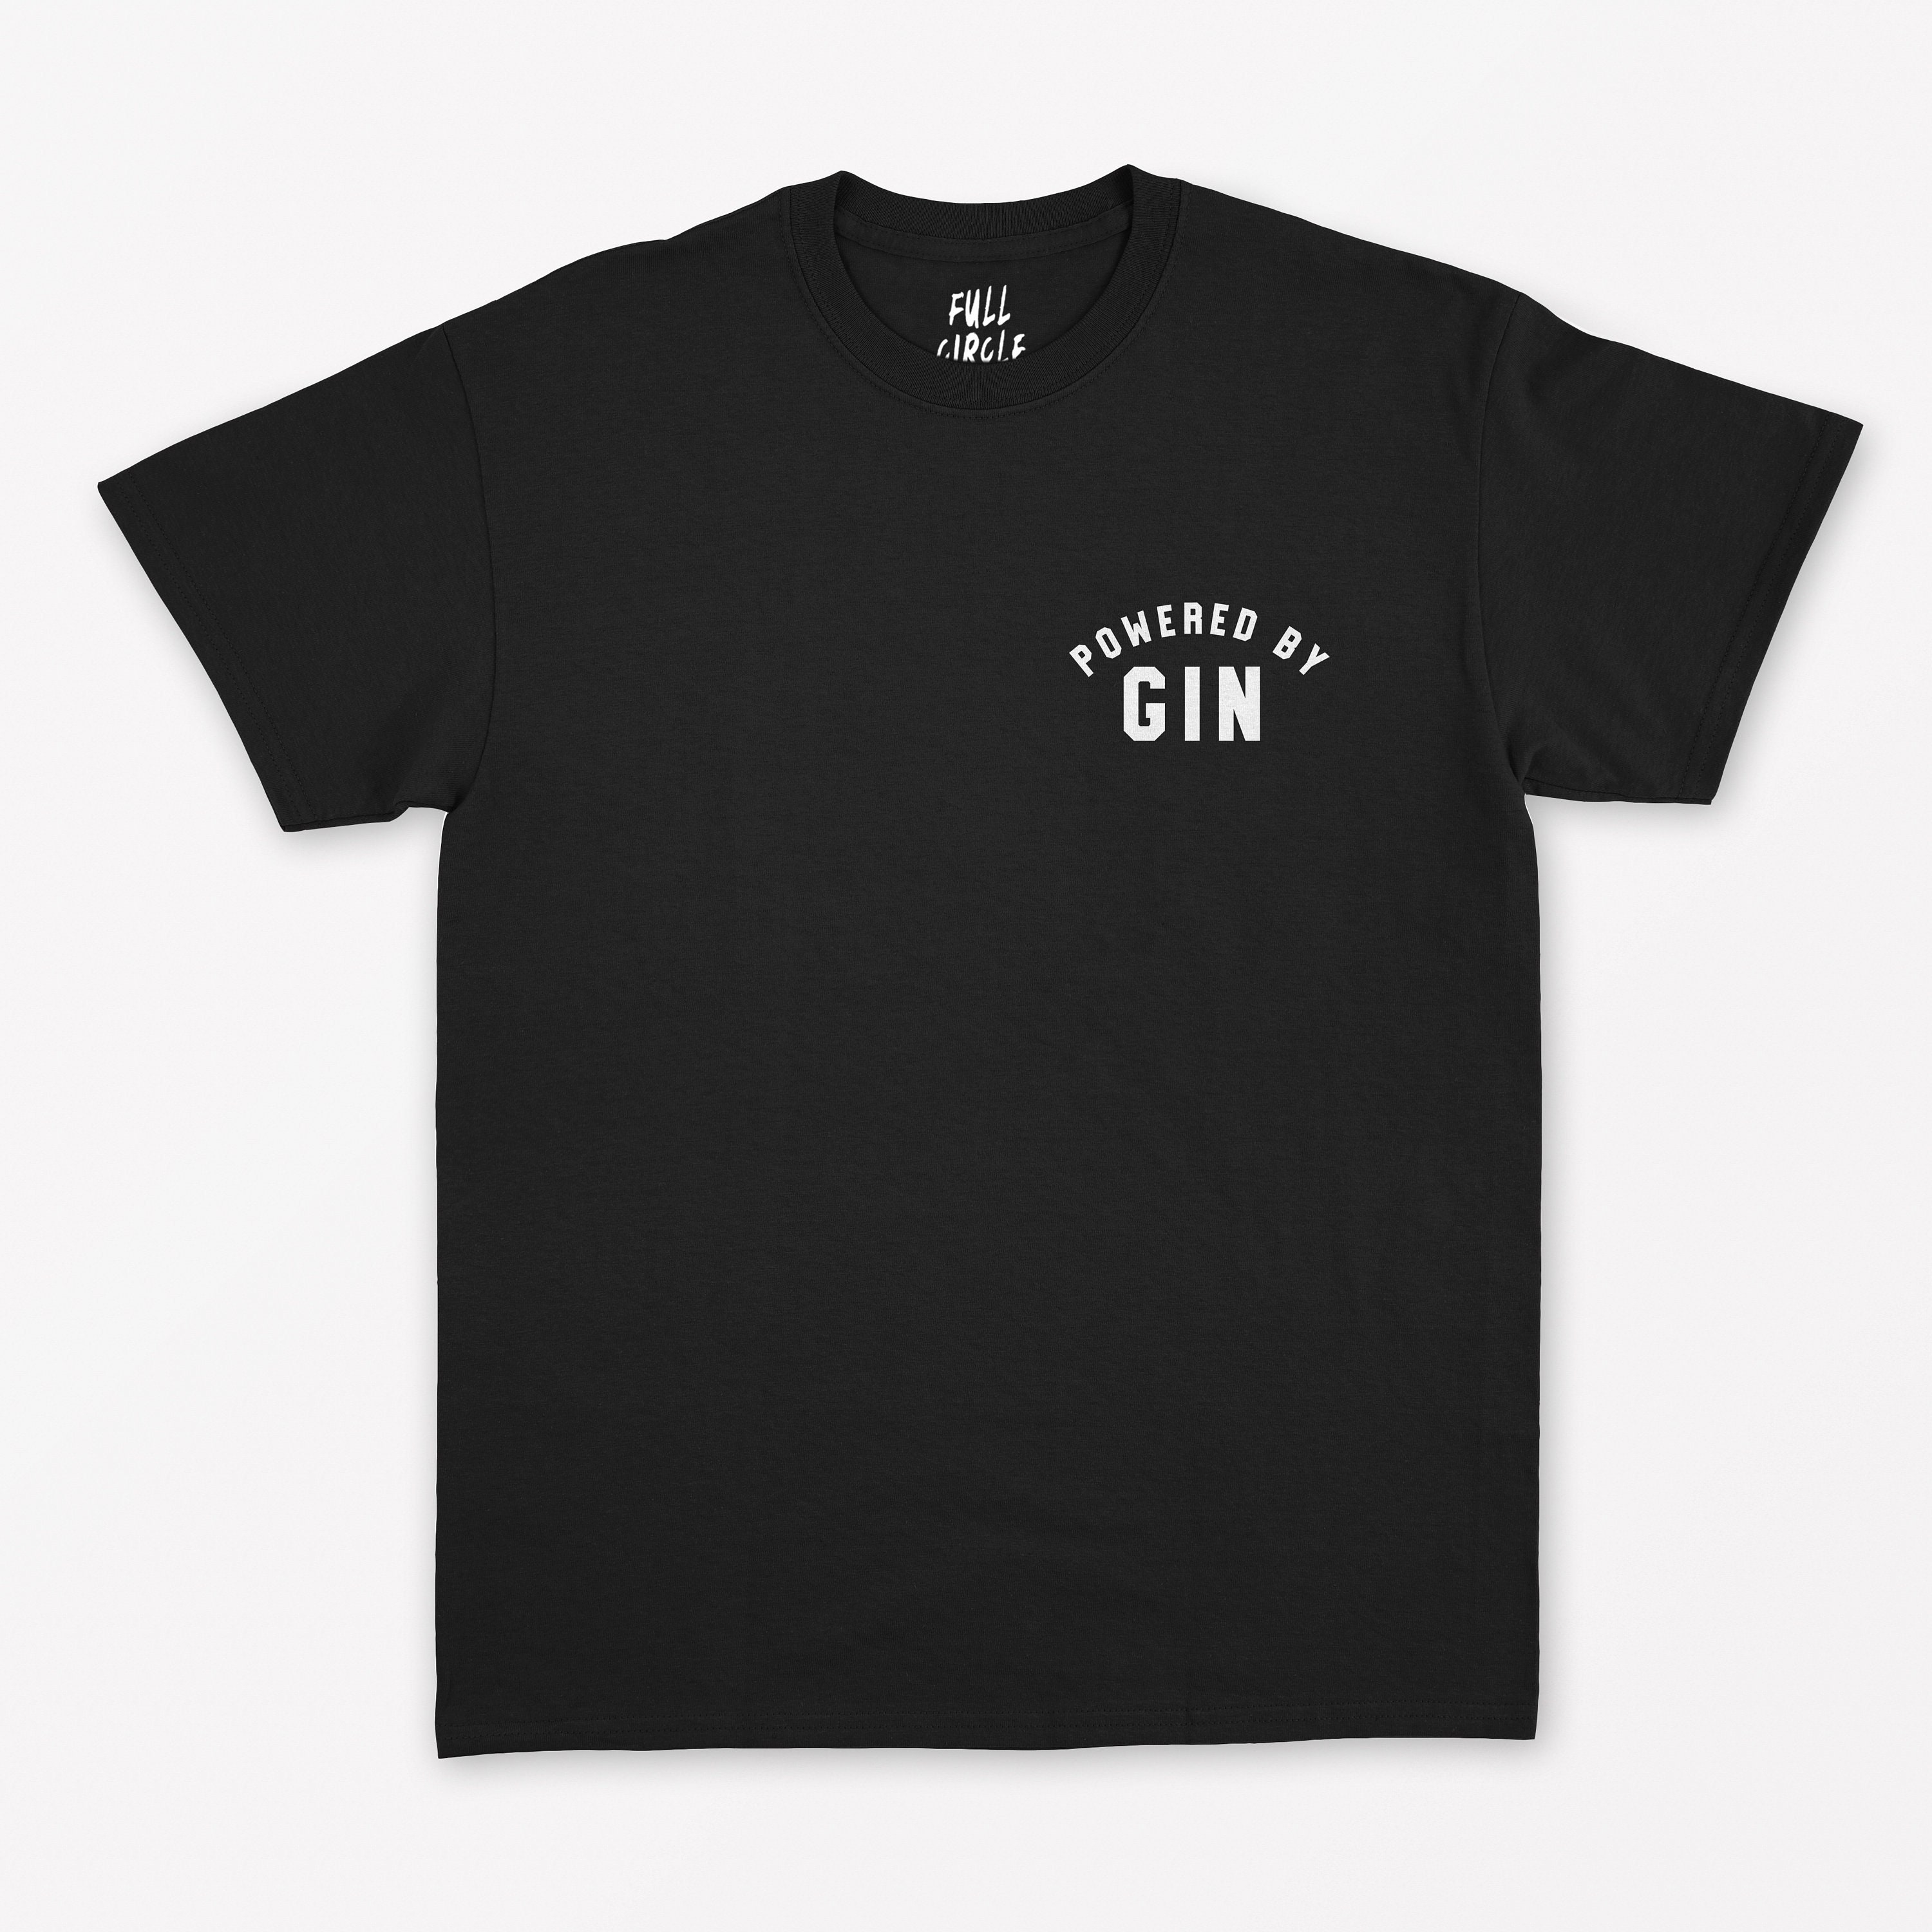 Powered by Gin T Shirt Gin Lover Gift / Beer T Shirt / Vodka - Etsy UK